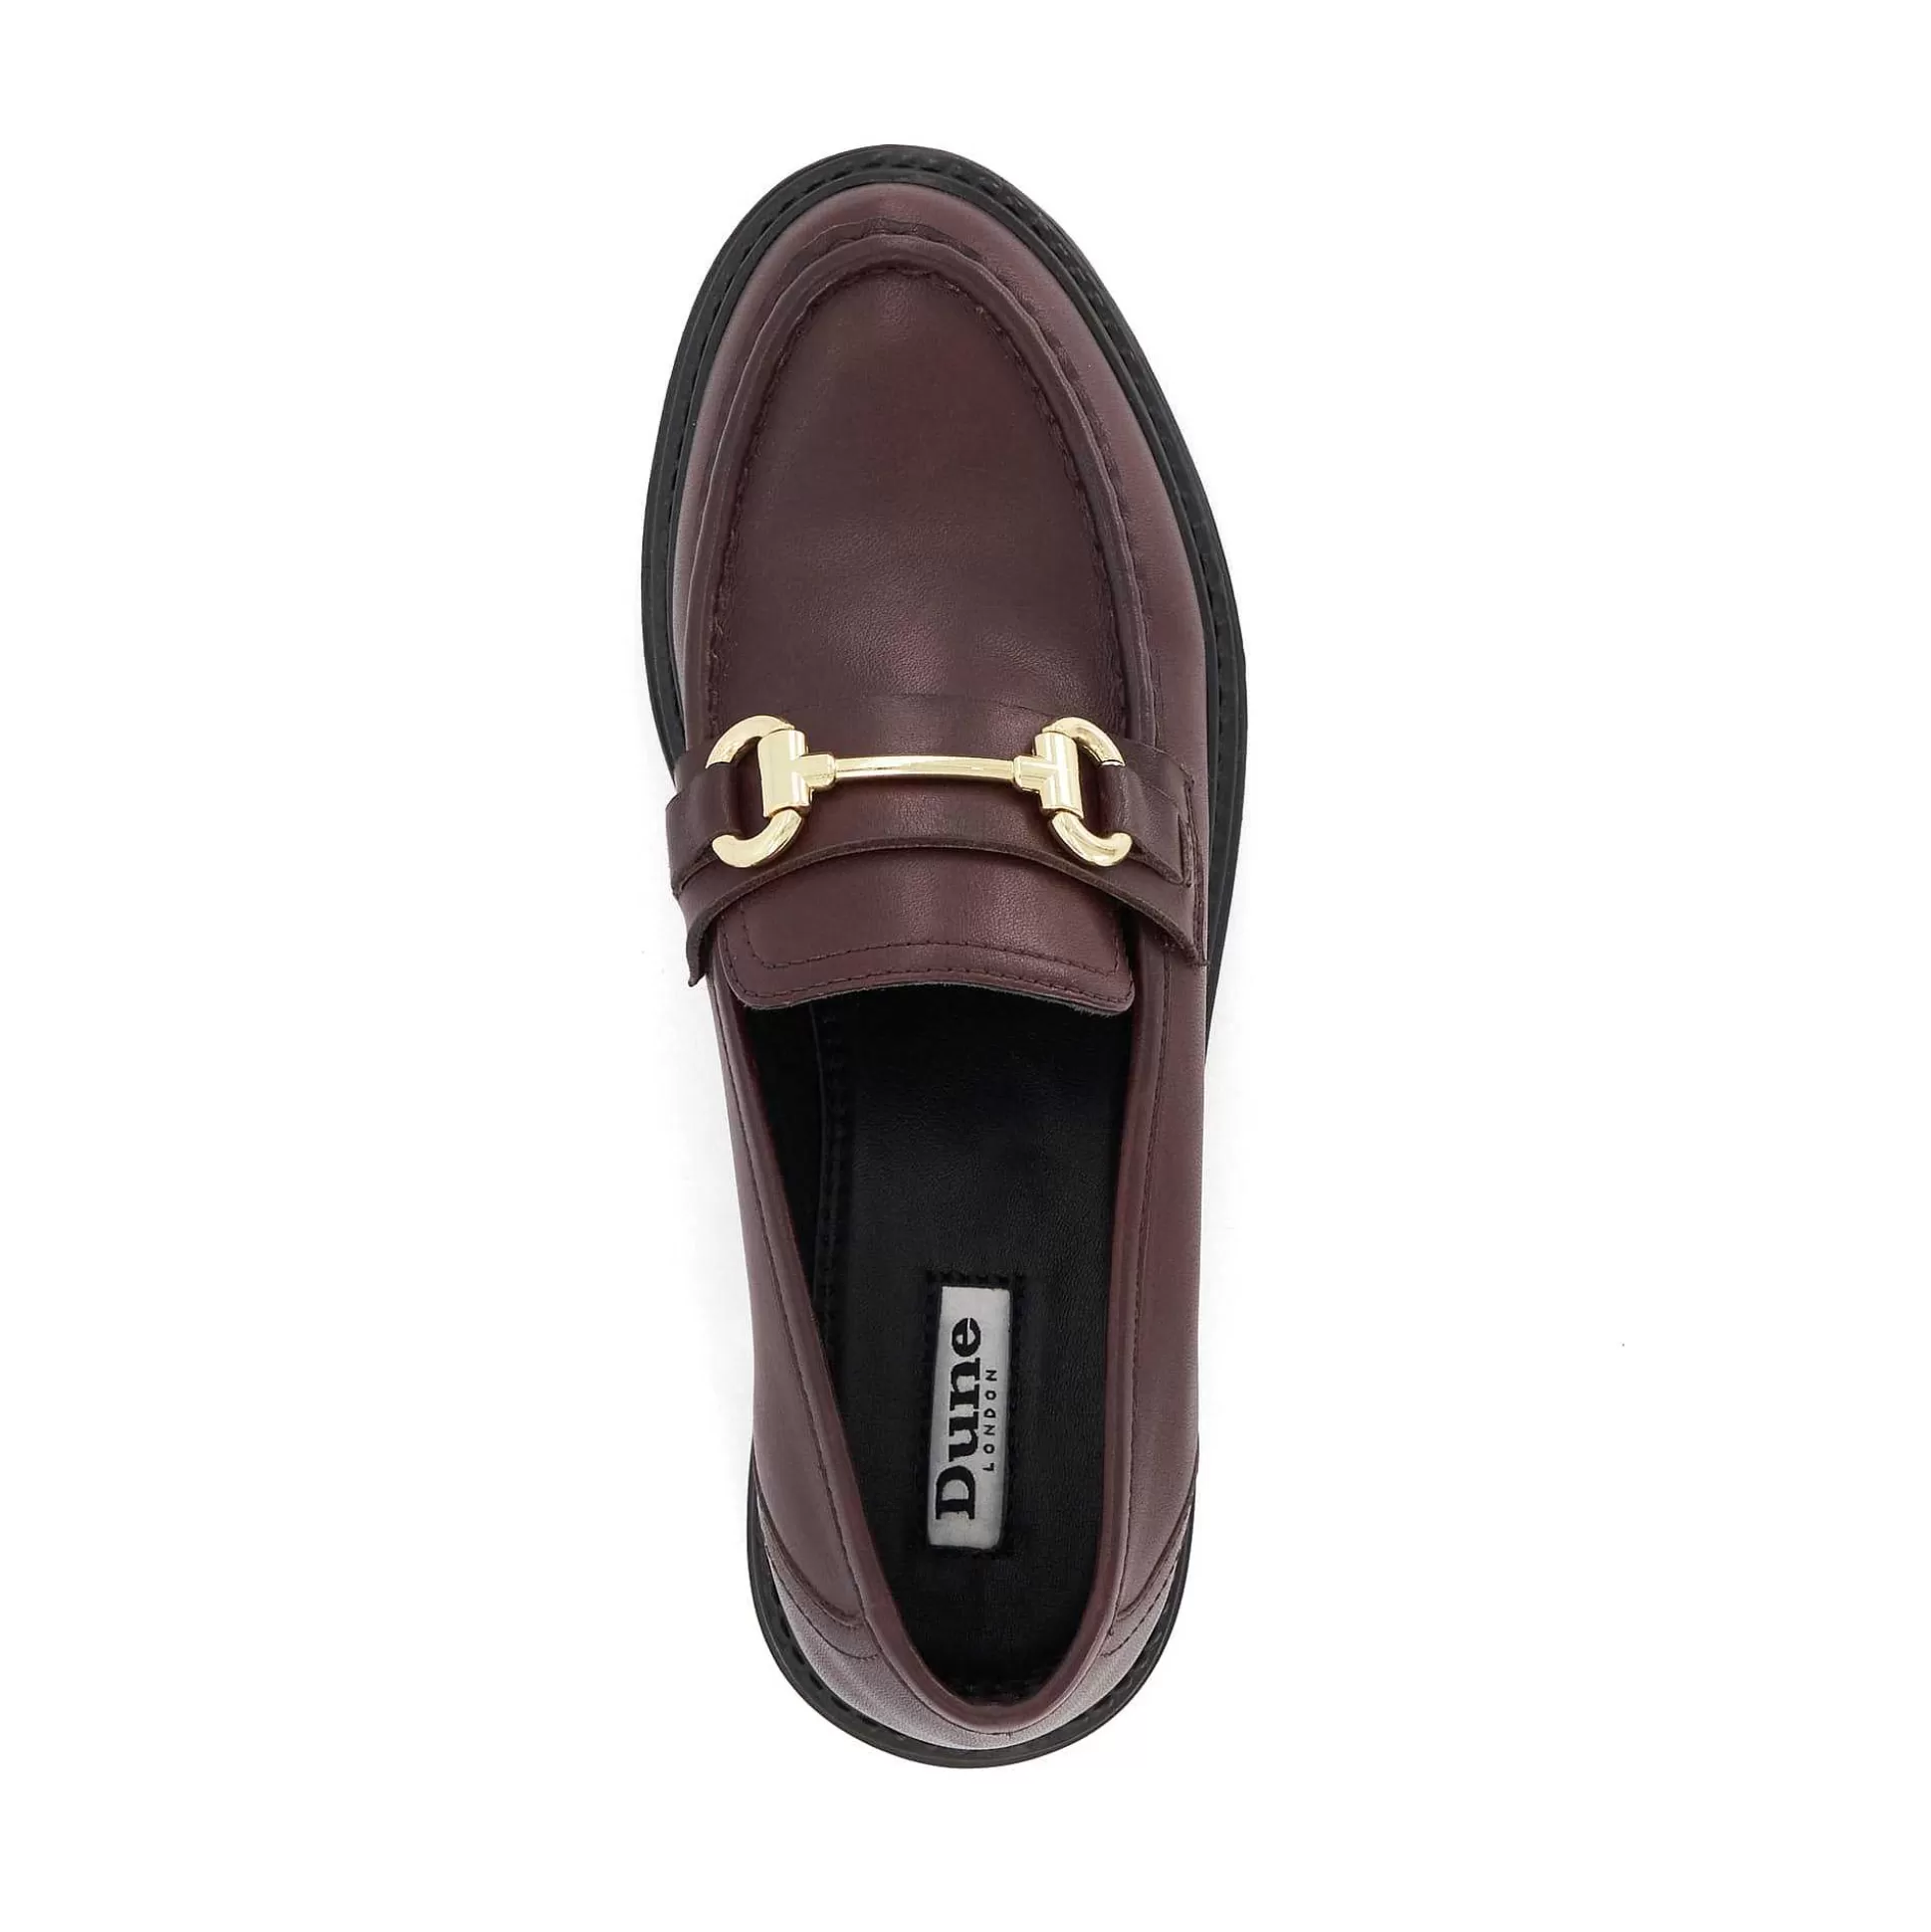 Dune London GALLAGHER - BURGUNDY-Women Flat Shoes | Loafers